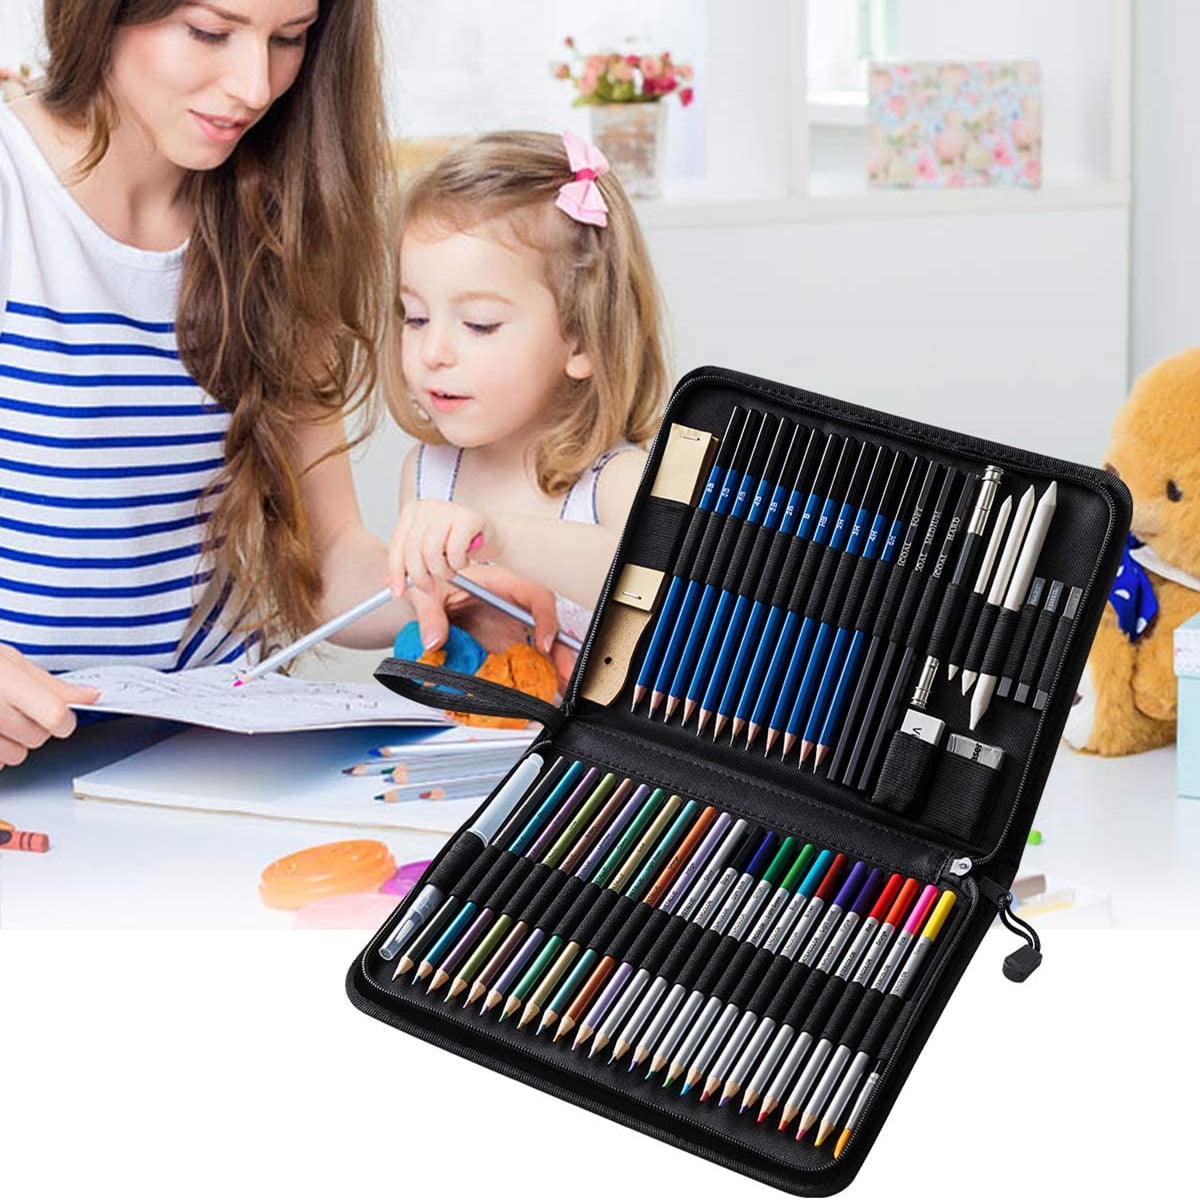 Corslet 145 Piece Colored Pencils Set Drawing Pencils and Sketching Kit  Complete Artist Kit Includes Graphite Pencils Metallic Color Pencils  WaterSoluble Color Pencils Sketch Kit for Drawing  Amazonin Home   Kitchen